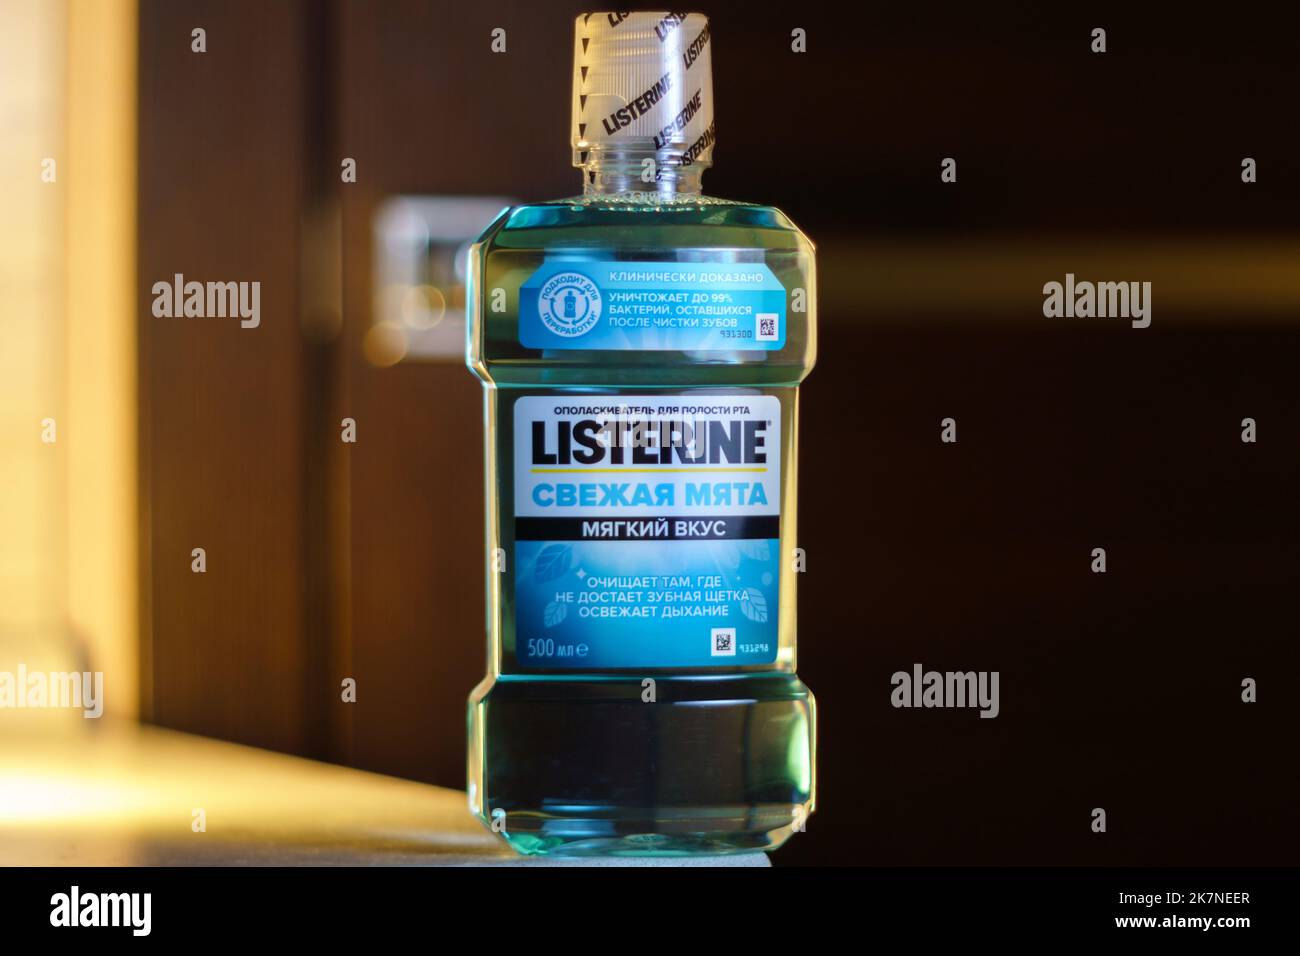 Tyumen, Russia-October 14, 2022: Listerine American brand of antiseptic mouthwash product, founded in 1879 in St.Louis,Missouri. Selective focus Stock Photo